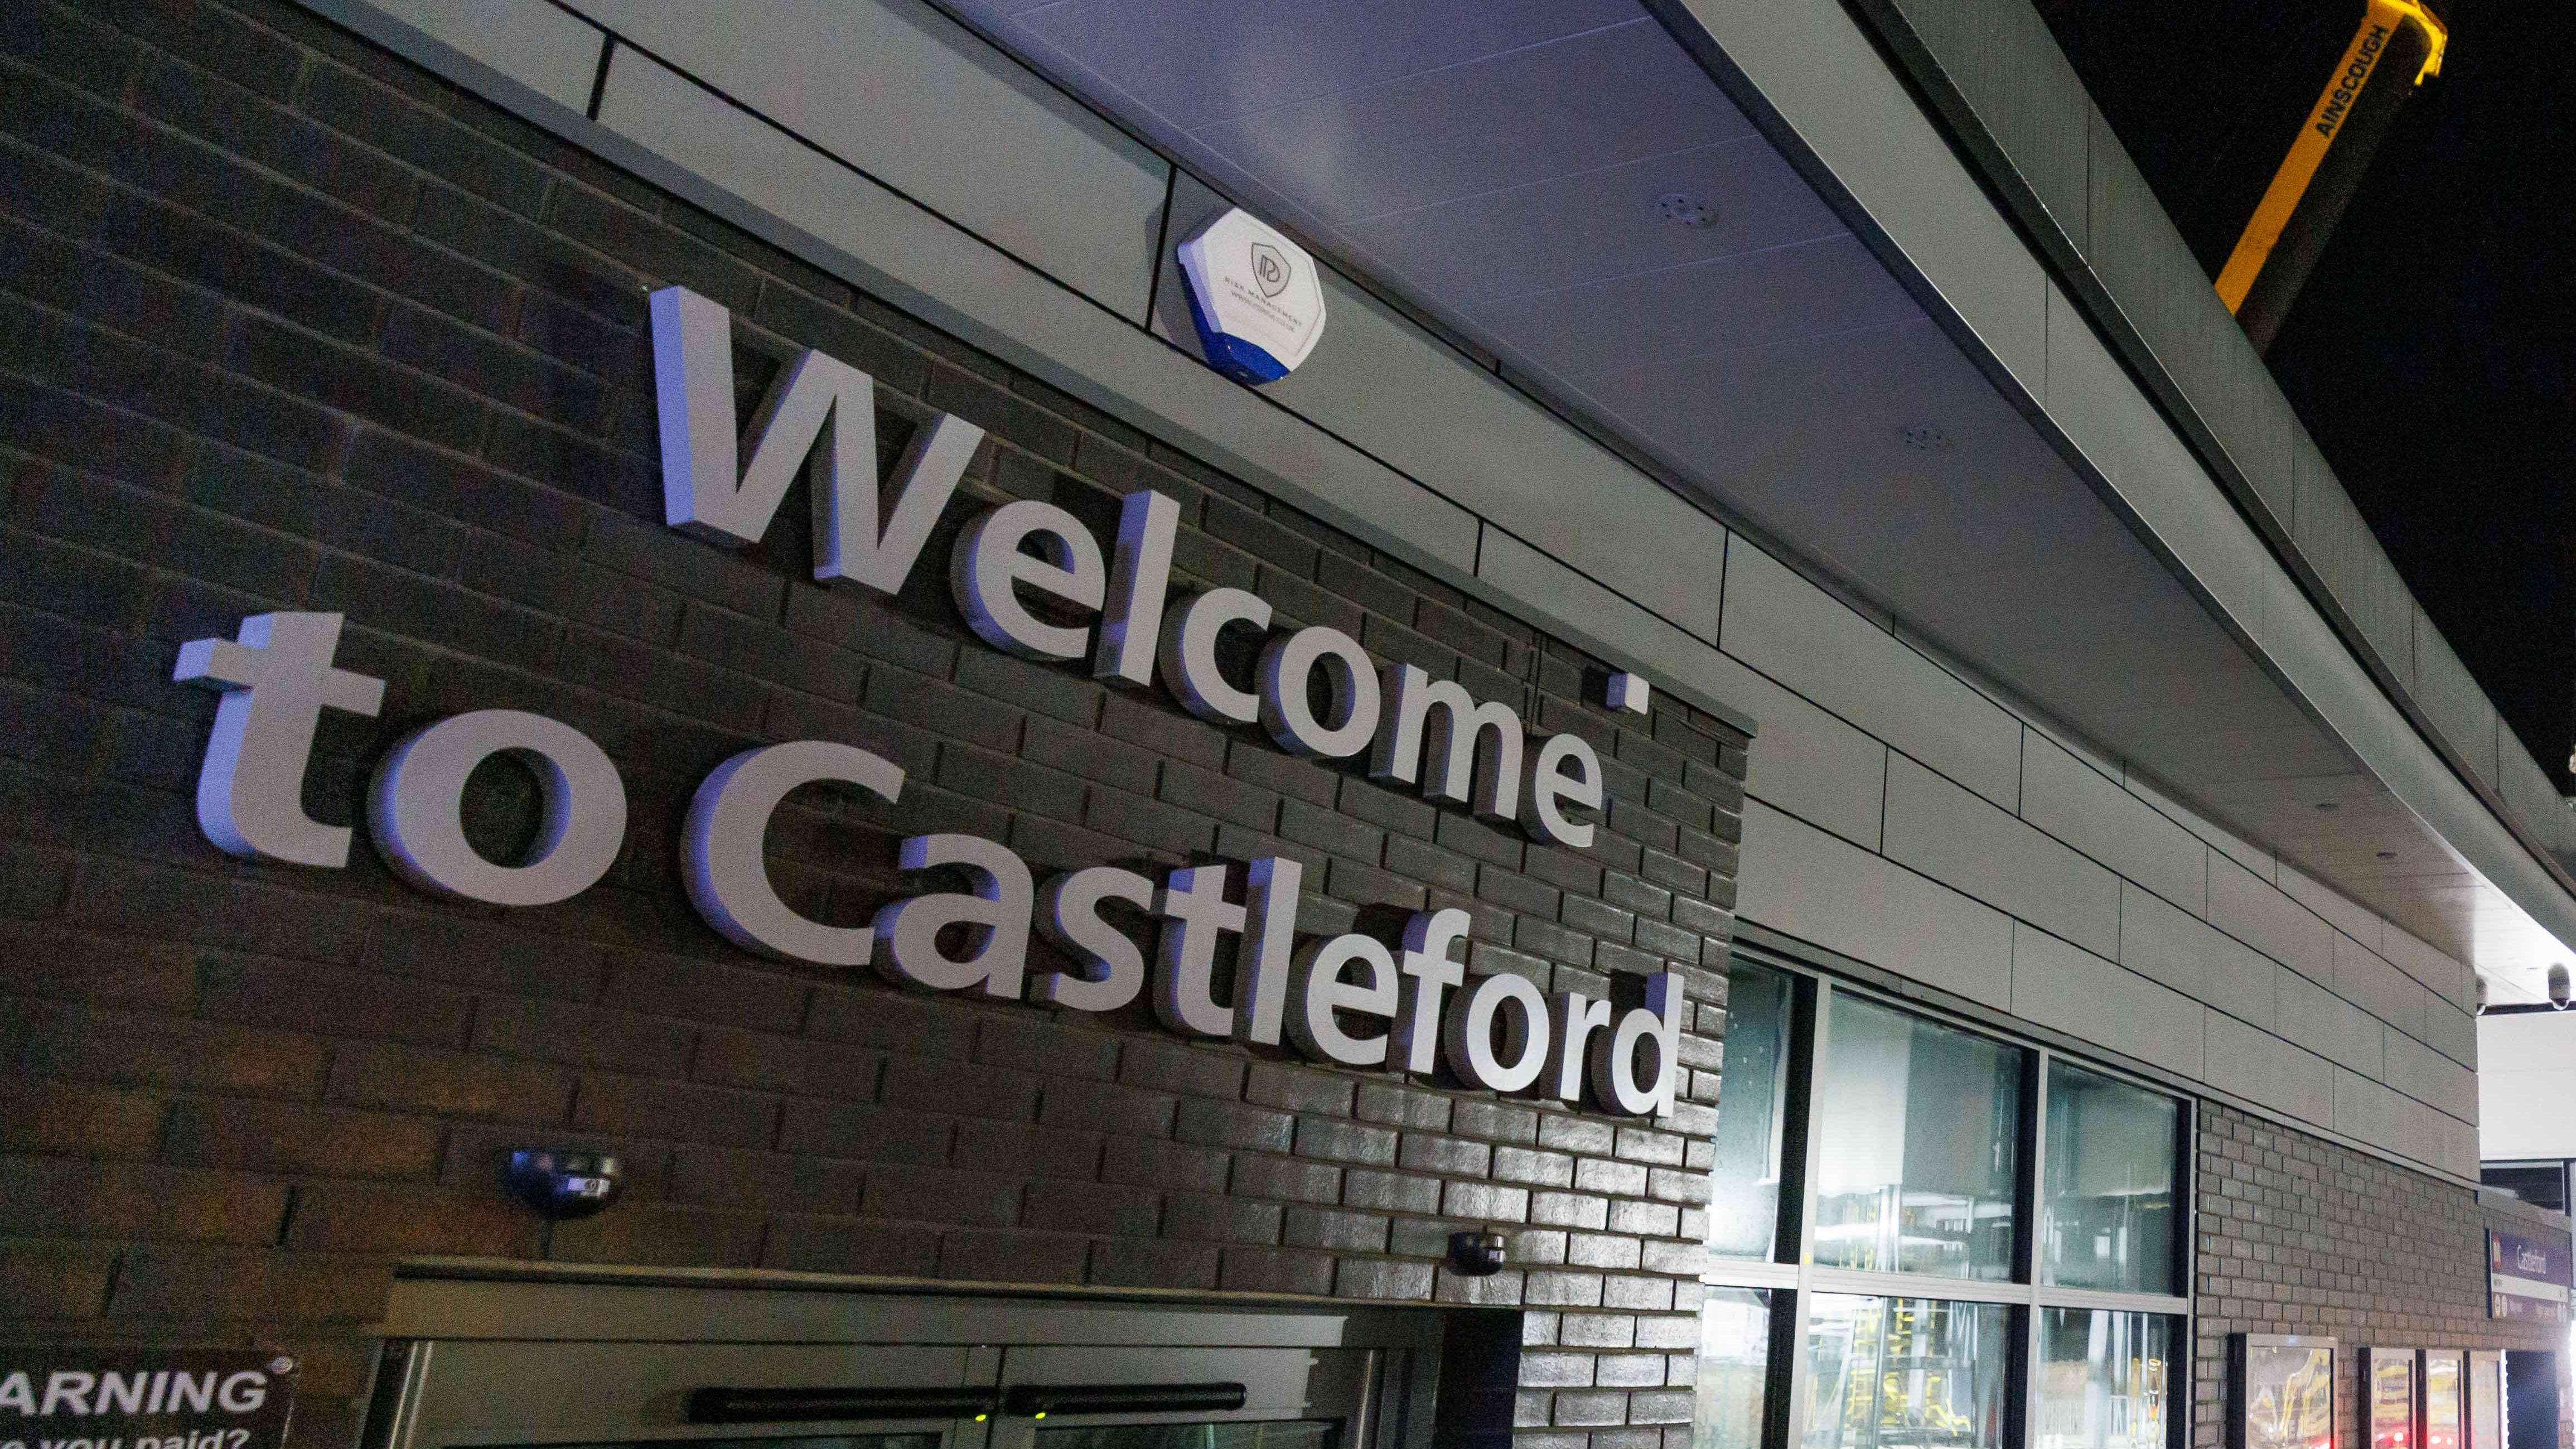 Welcome to Castleford sign